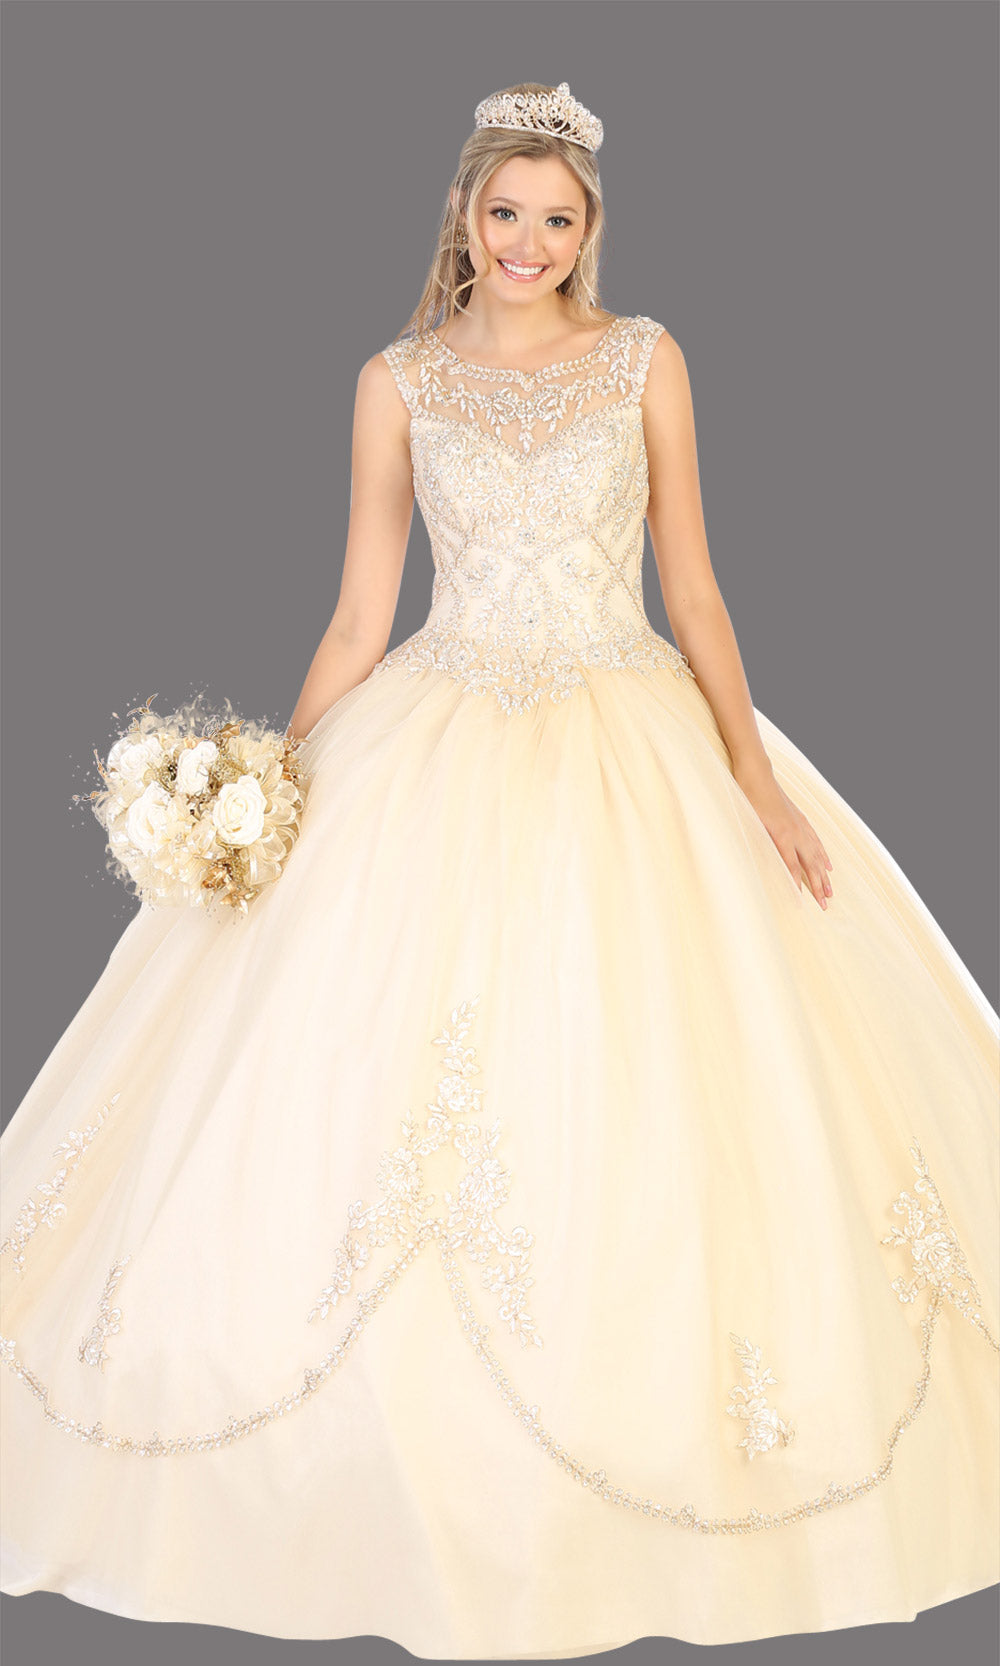 Mayqueen LK130 champagne gold quinceanera high neck ball gown w/sequin detail. Light gold ball gown is perfect for engagement dress, wedding reception, indowestern party gown, sweet 16, debut, sweet 15, sweet 18. Plus sizes available for ballgowns.jpg